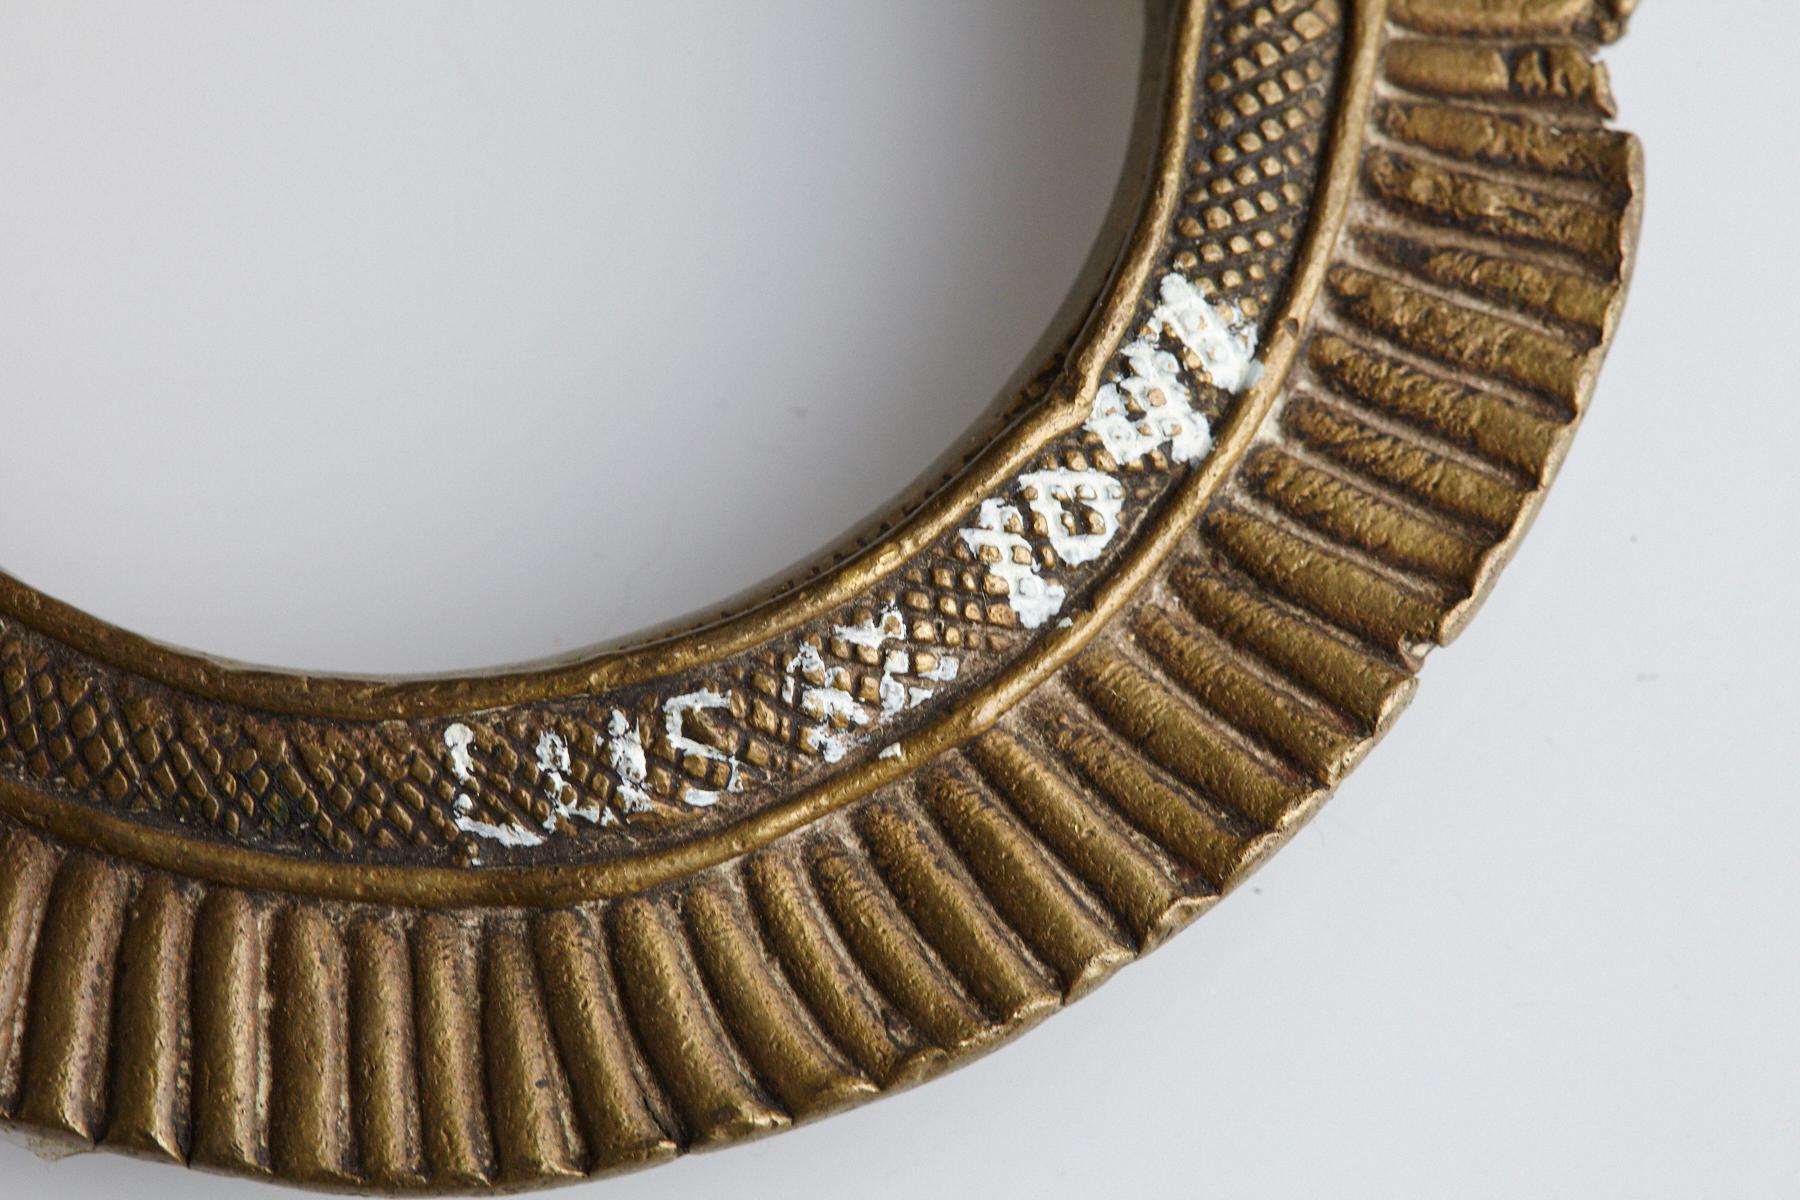 Forged Bronze Currency Bracelet/Manilla, Beri People, Sudan, 19th Century - No 1 For Sale